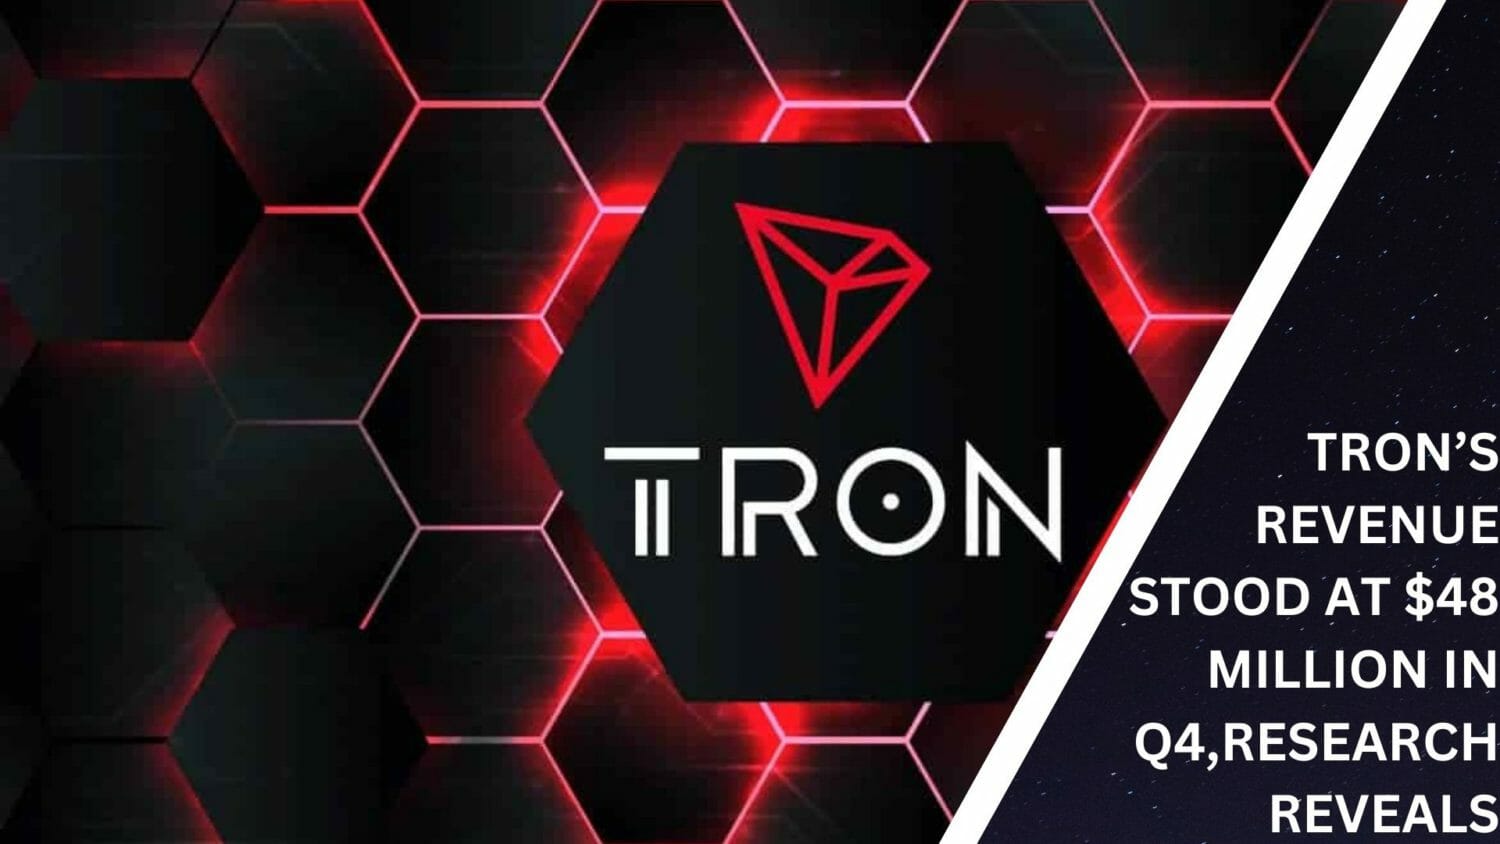 Tron’s Revenue Stood At $48 Million In Q4,Research Reveals